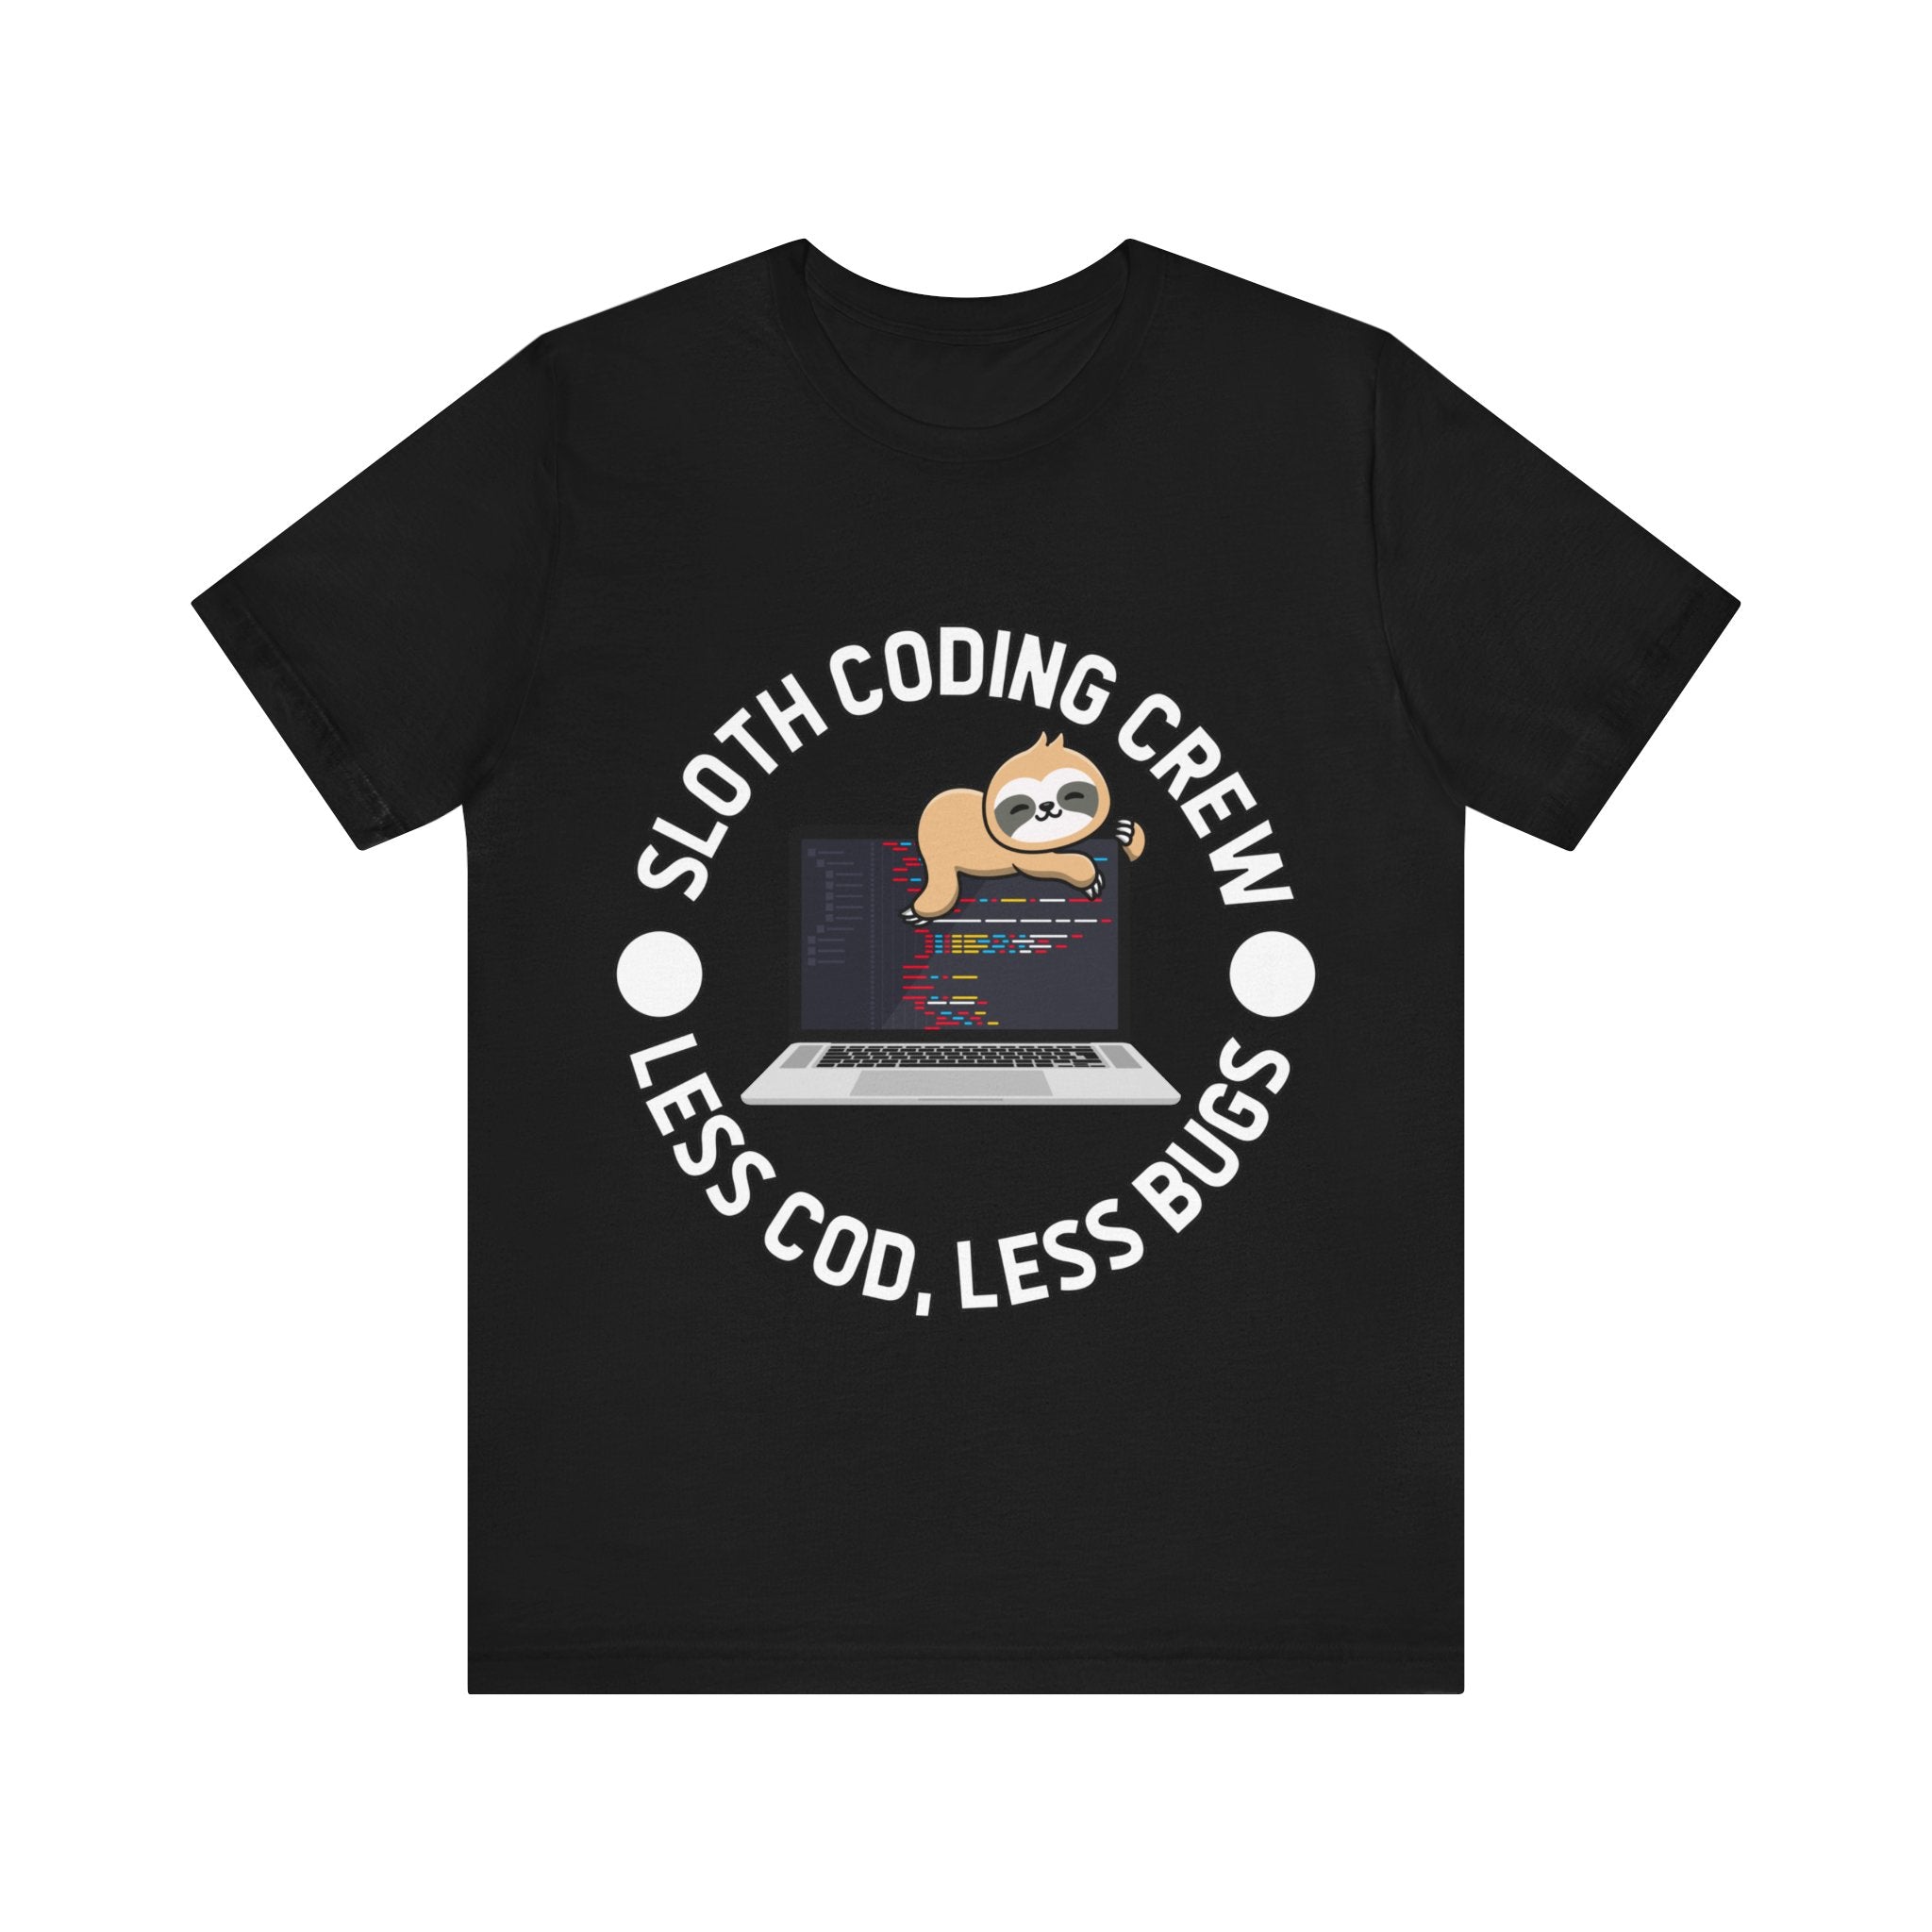 Black unisex jersey tee featuring a cartoon sloth on a laptop with text "Sloth Coding Crew Less Cod Less Bugs Tee".